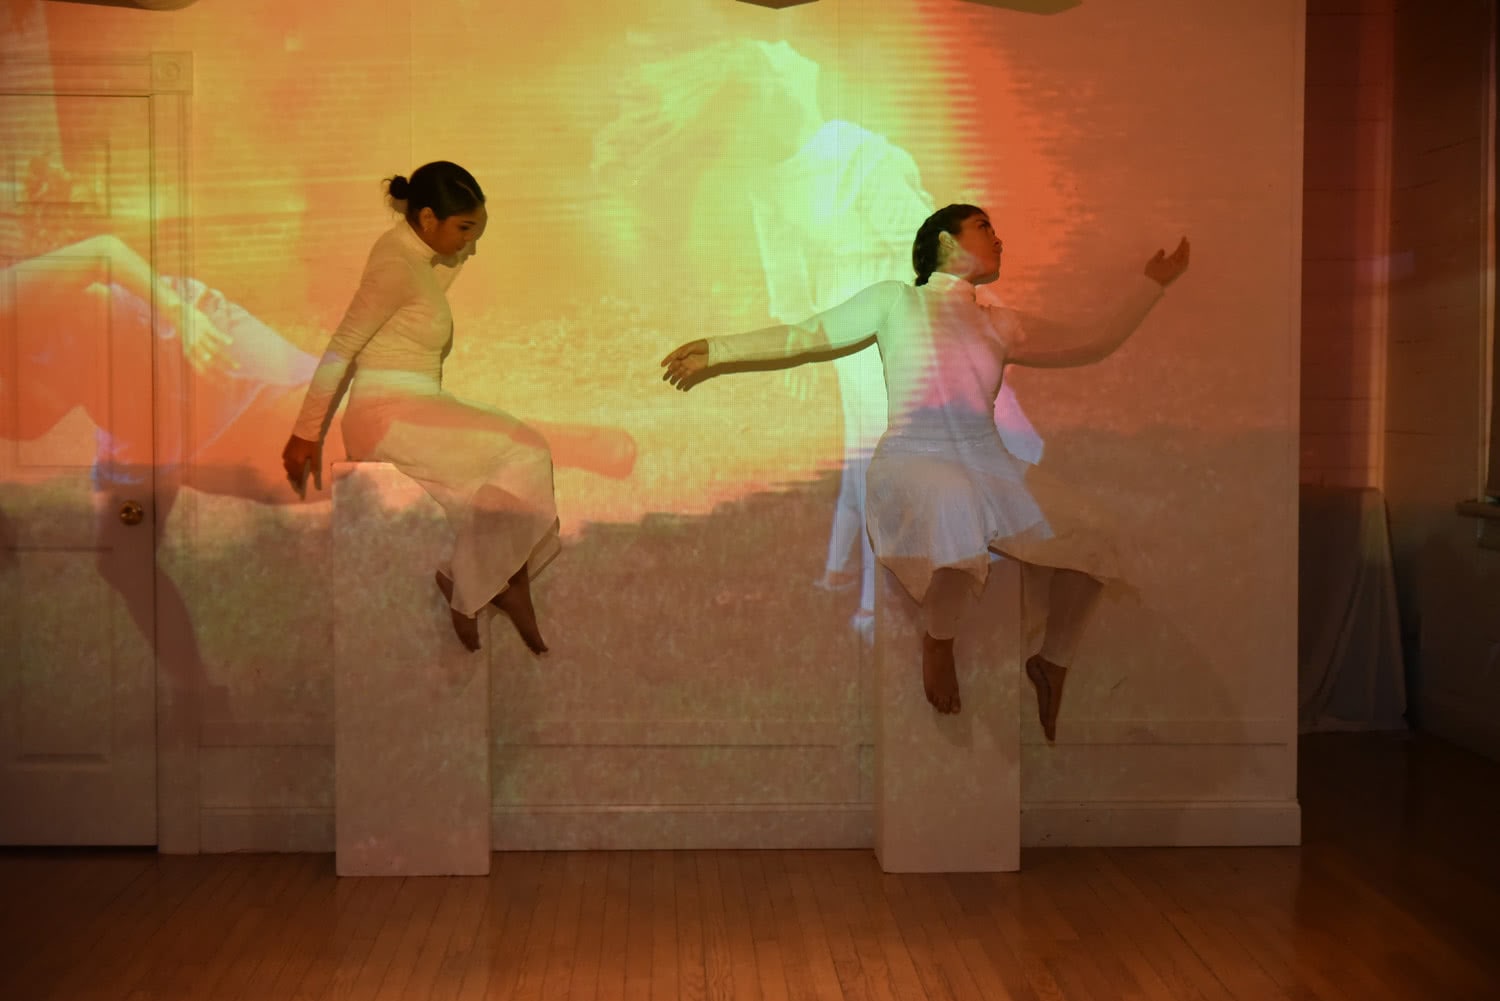 Teatro Yerbabruja: Two dancers wearing white flowy costumes are posed on pedestals, as if they were statues in a museum. The two dancers are standing in front of a projection of someone dancing, and because the dancers are wearing white, it’s almost as if the dancers are canvases for the projection themselves.